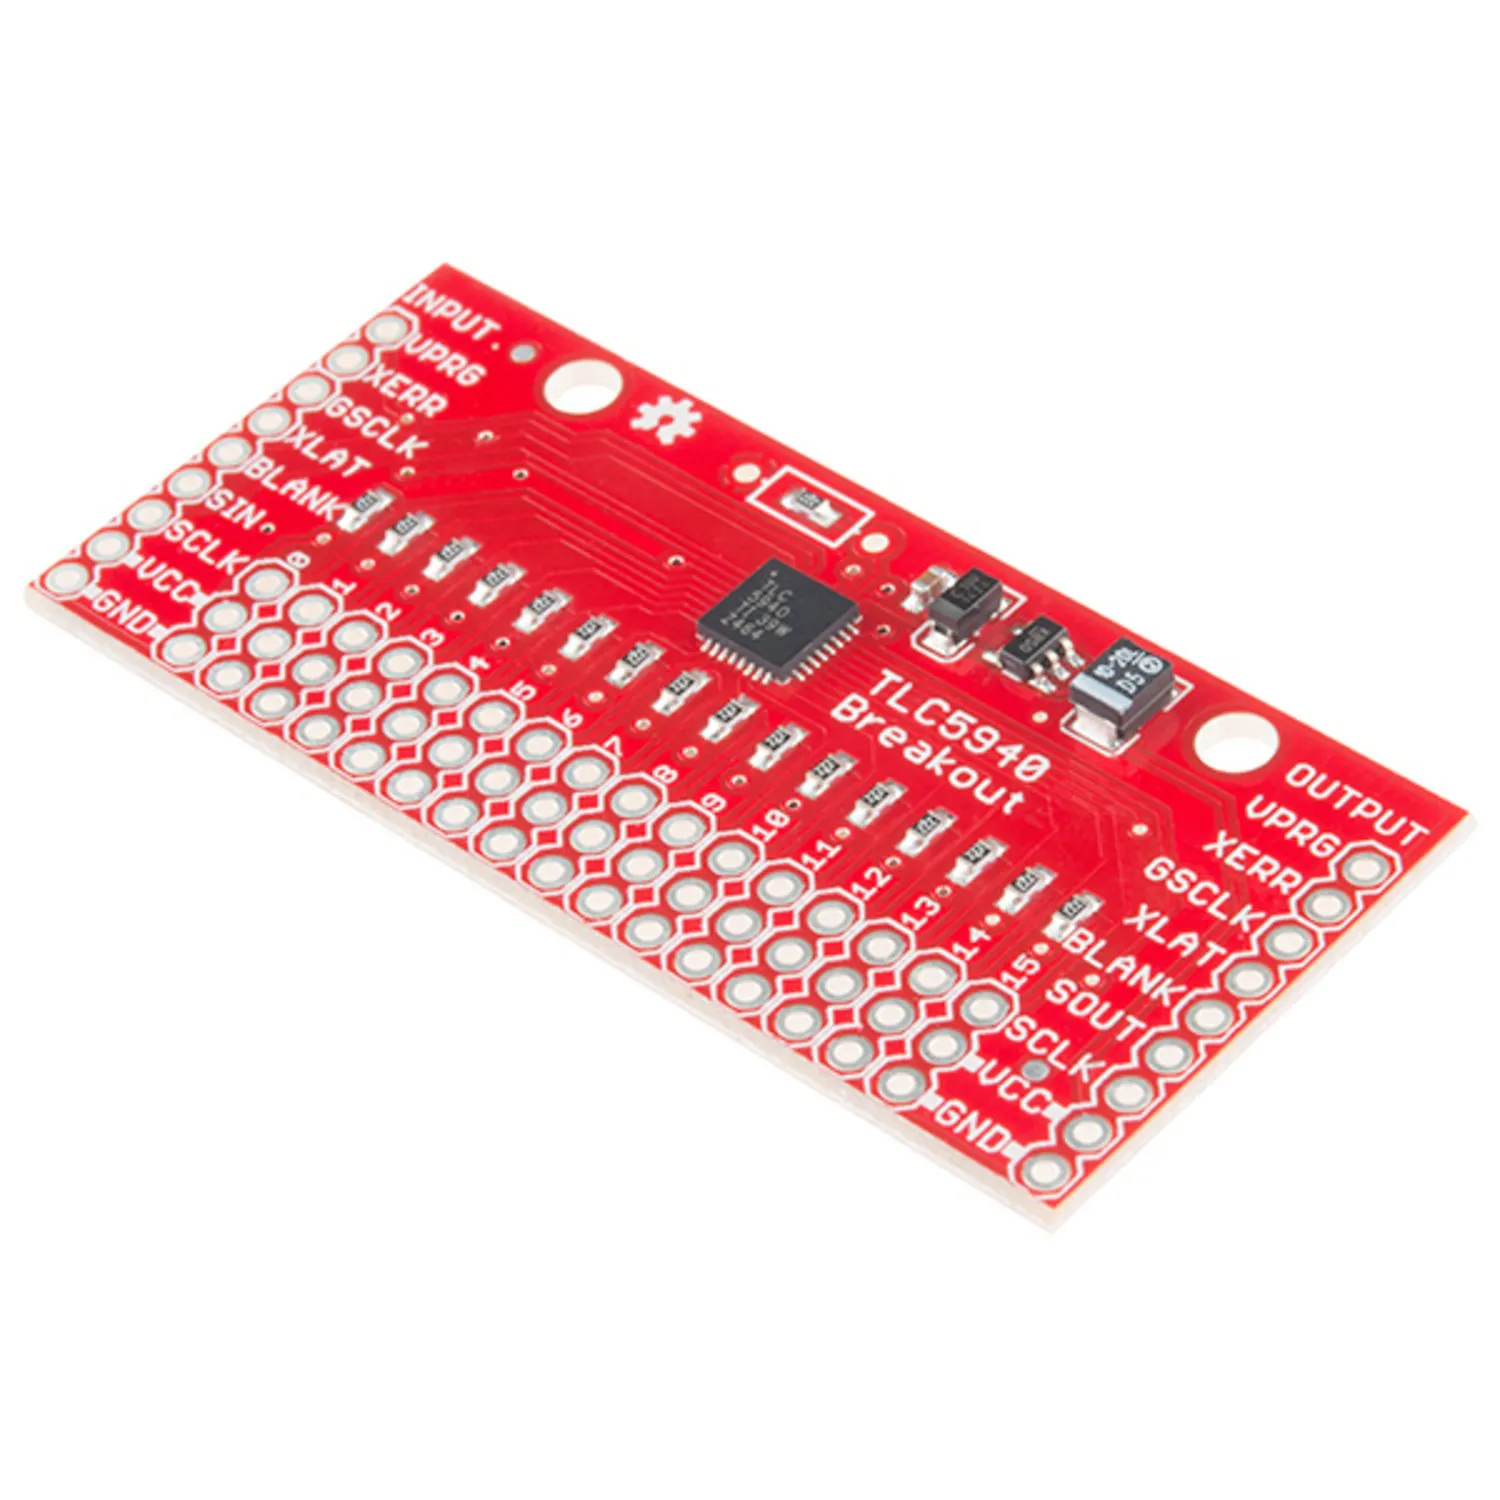 Photo of SparkFun LED Driver Breakout - TLC5940 (16 Channel)